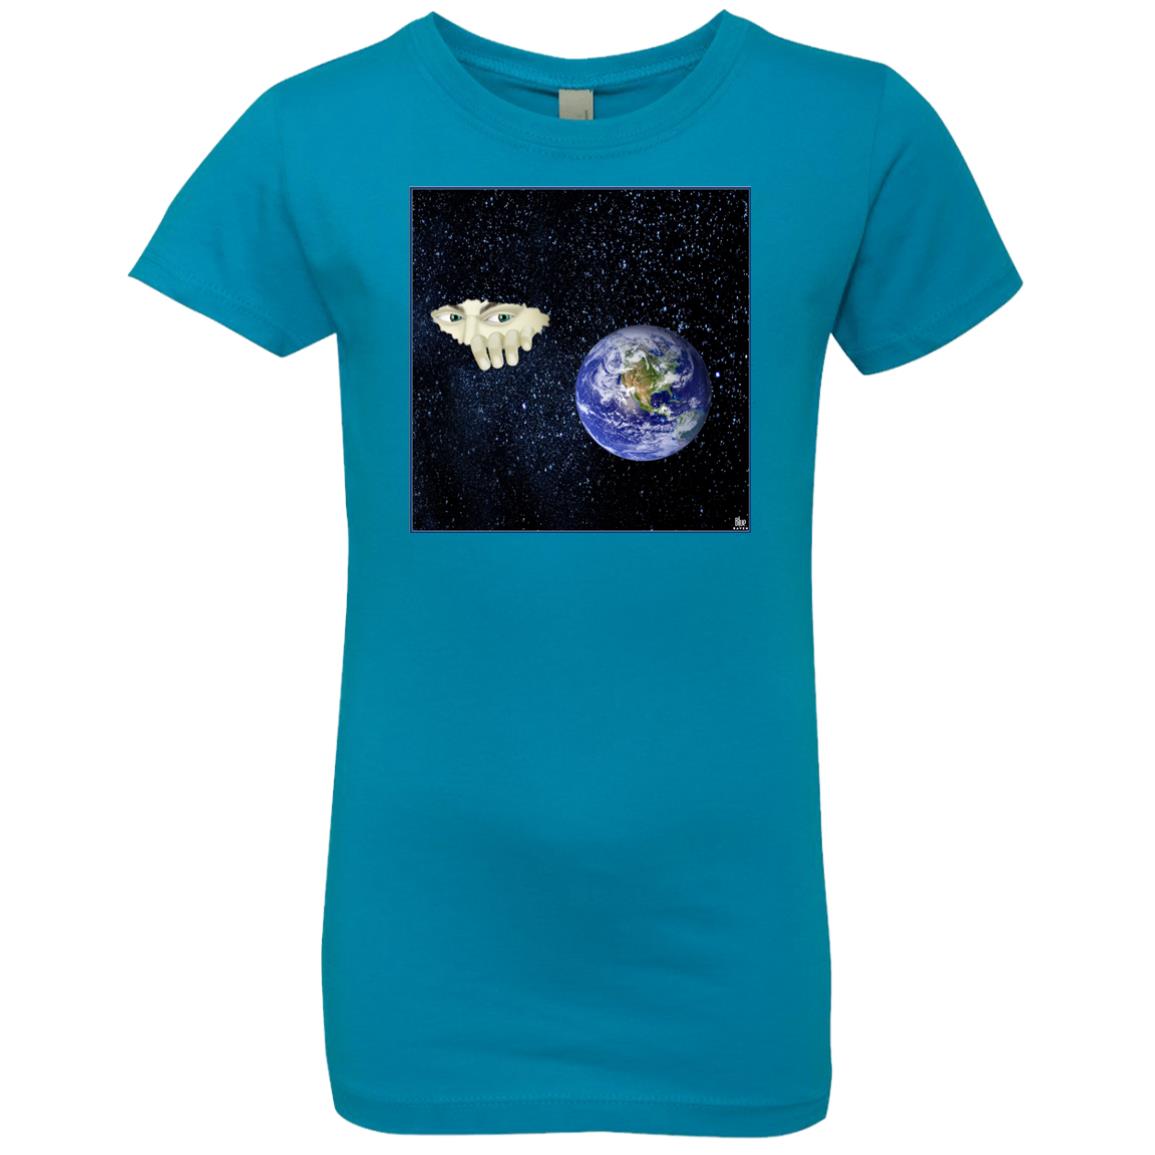 SOMEWHERE OUT THERE - Girl's Premium Cotton T-Shirt